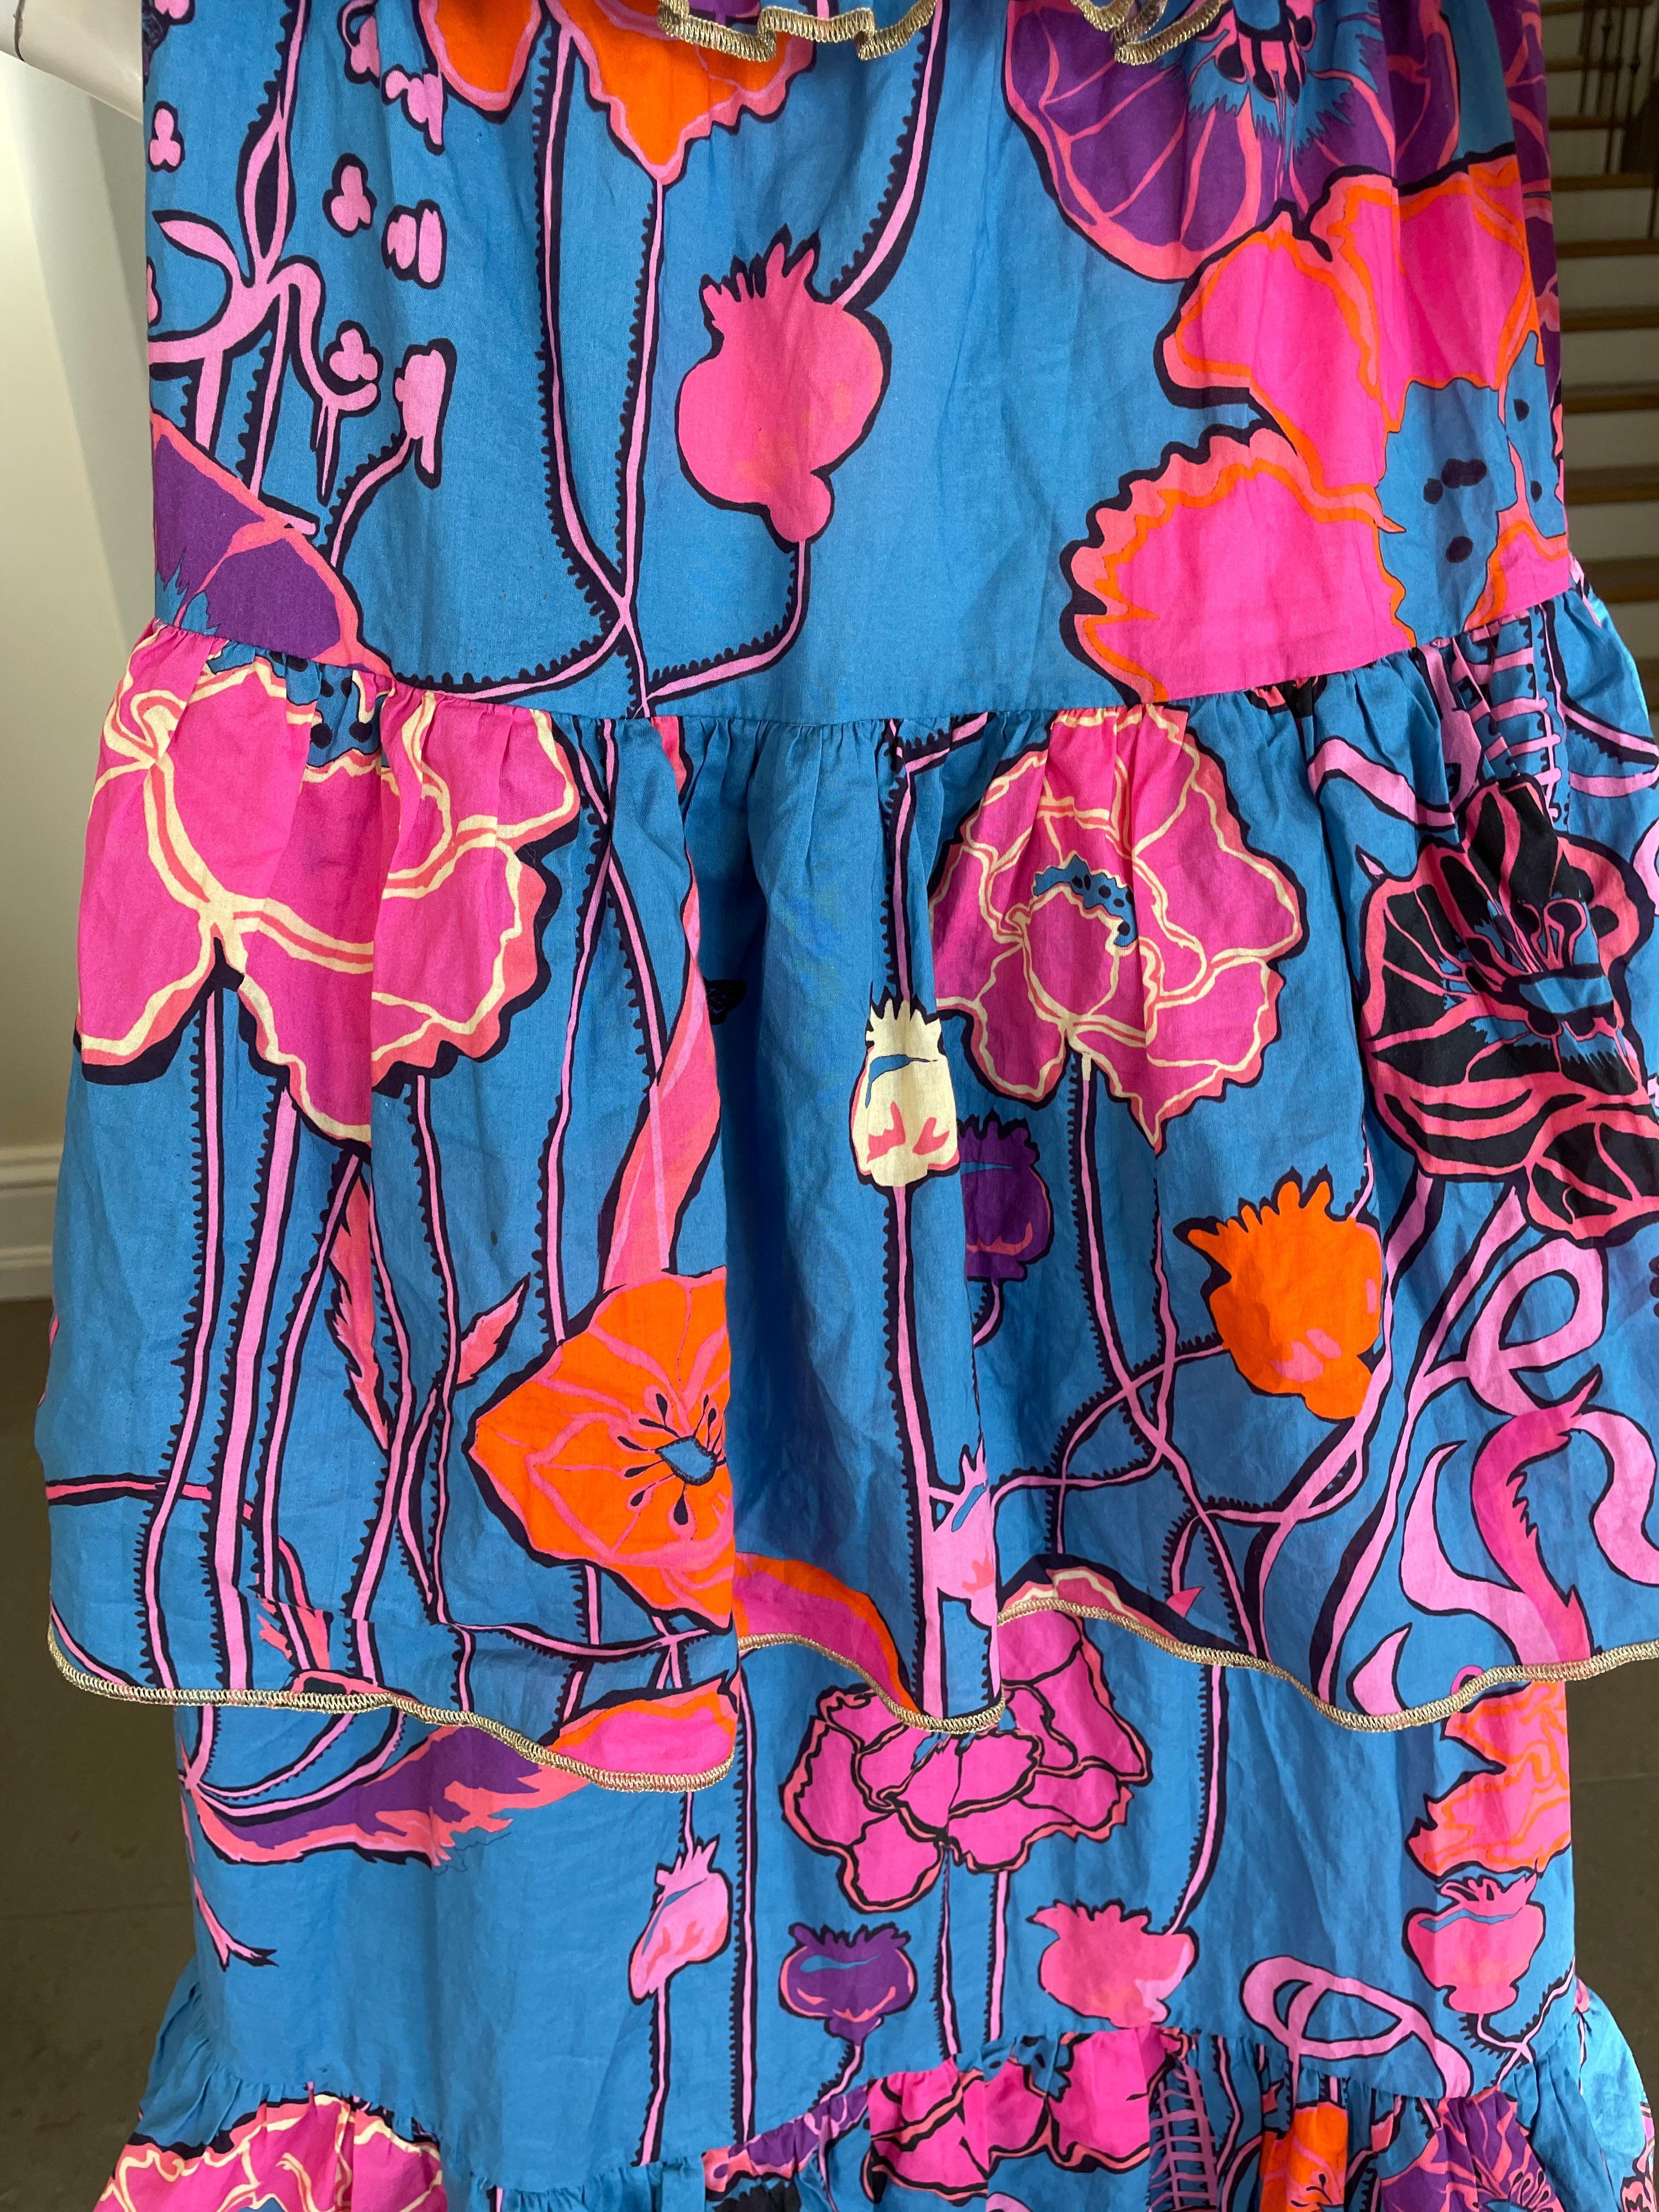 Dundas Tiered Bright Poppy Print Cotton Dress NEW For Sale 3